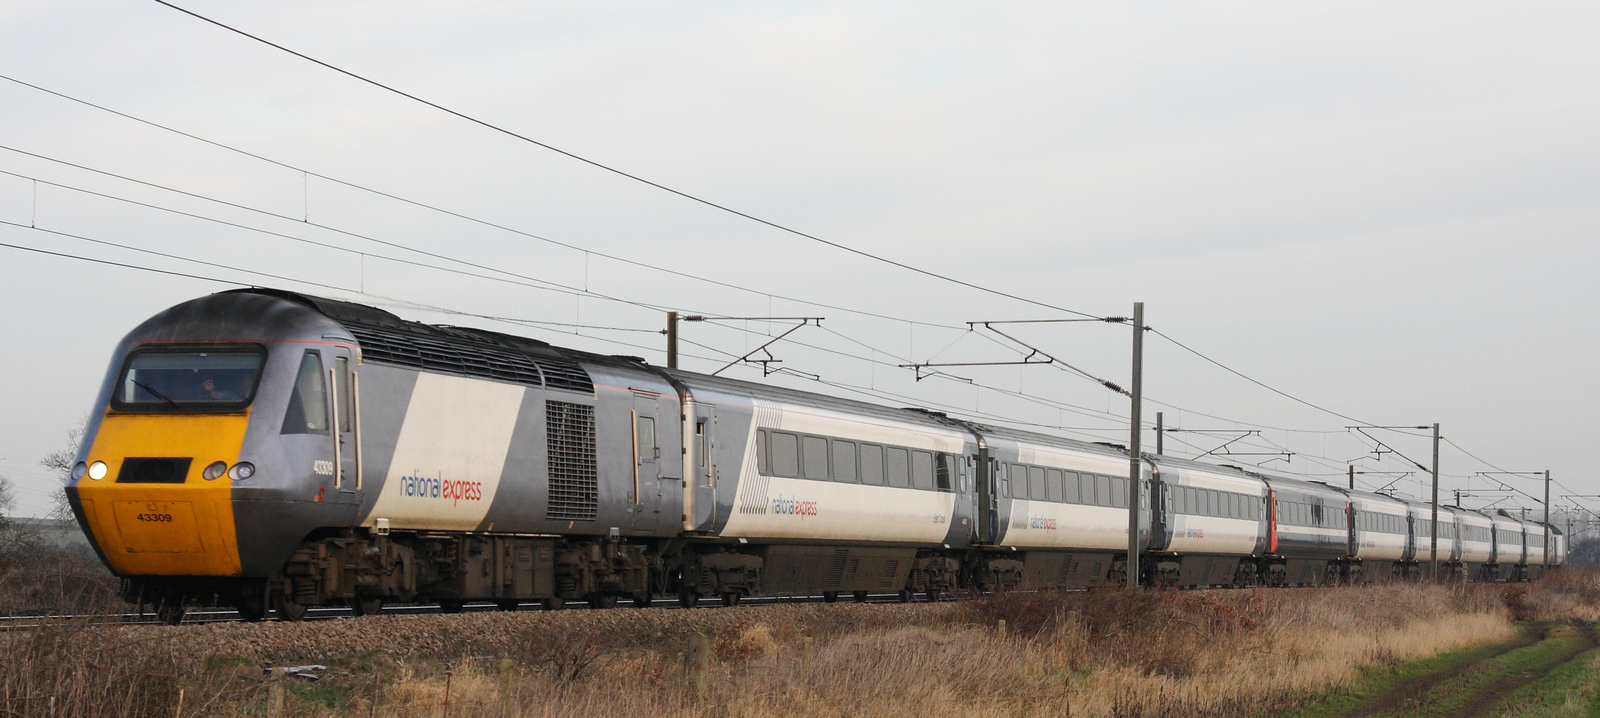 National Express HST with 43309 at the top in January 2009